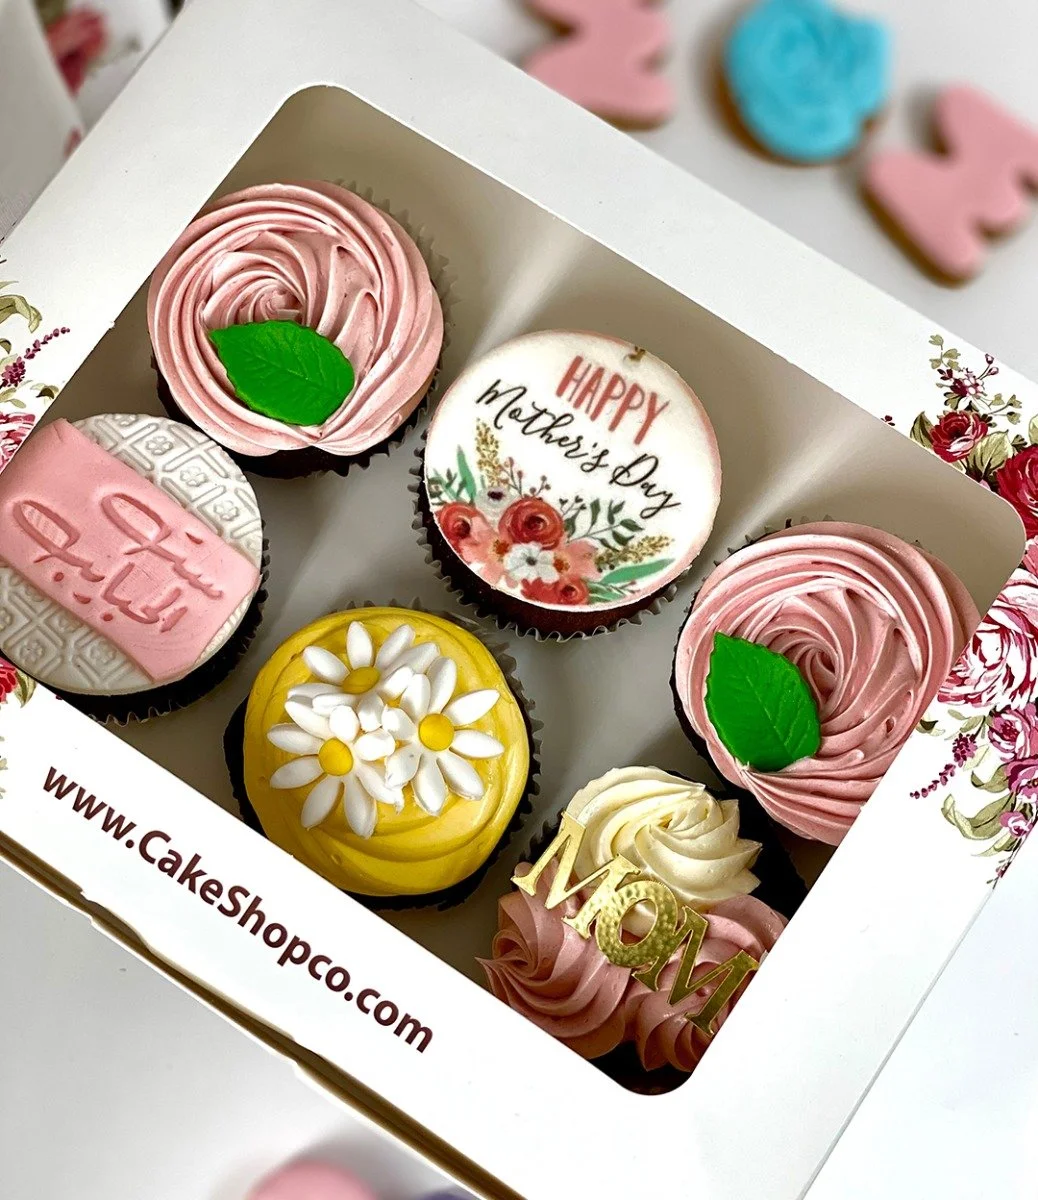 Mother's Day Cupcakes by The Cake Shop